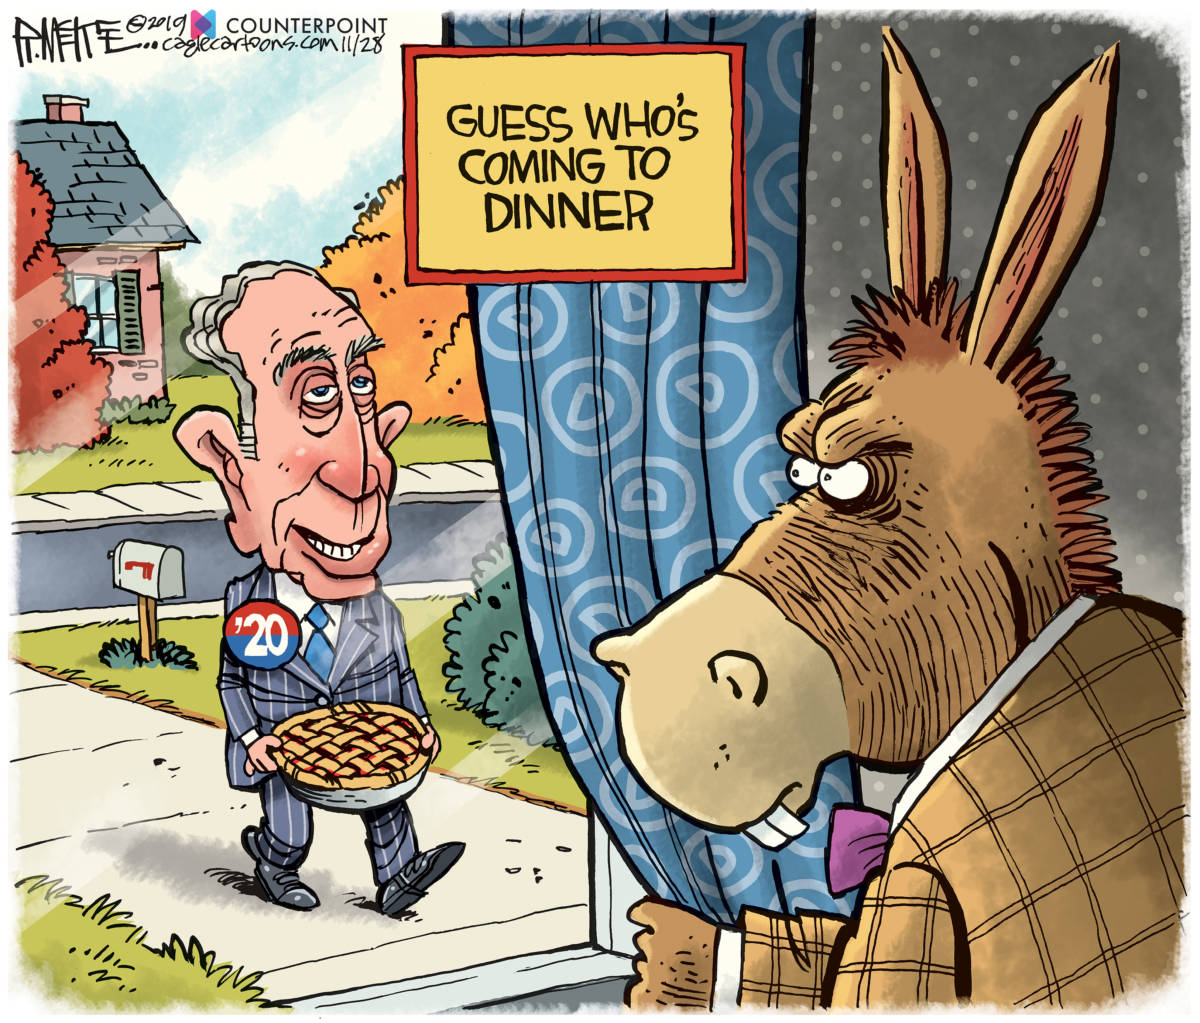 Bloomberg Dinner by Rick McKee, Counterpoint